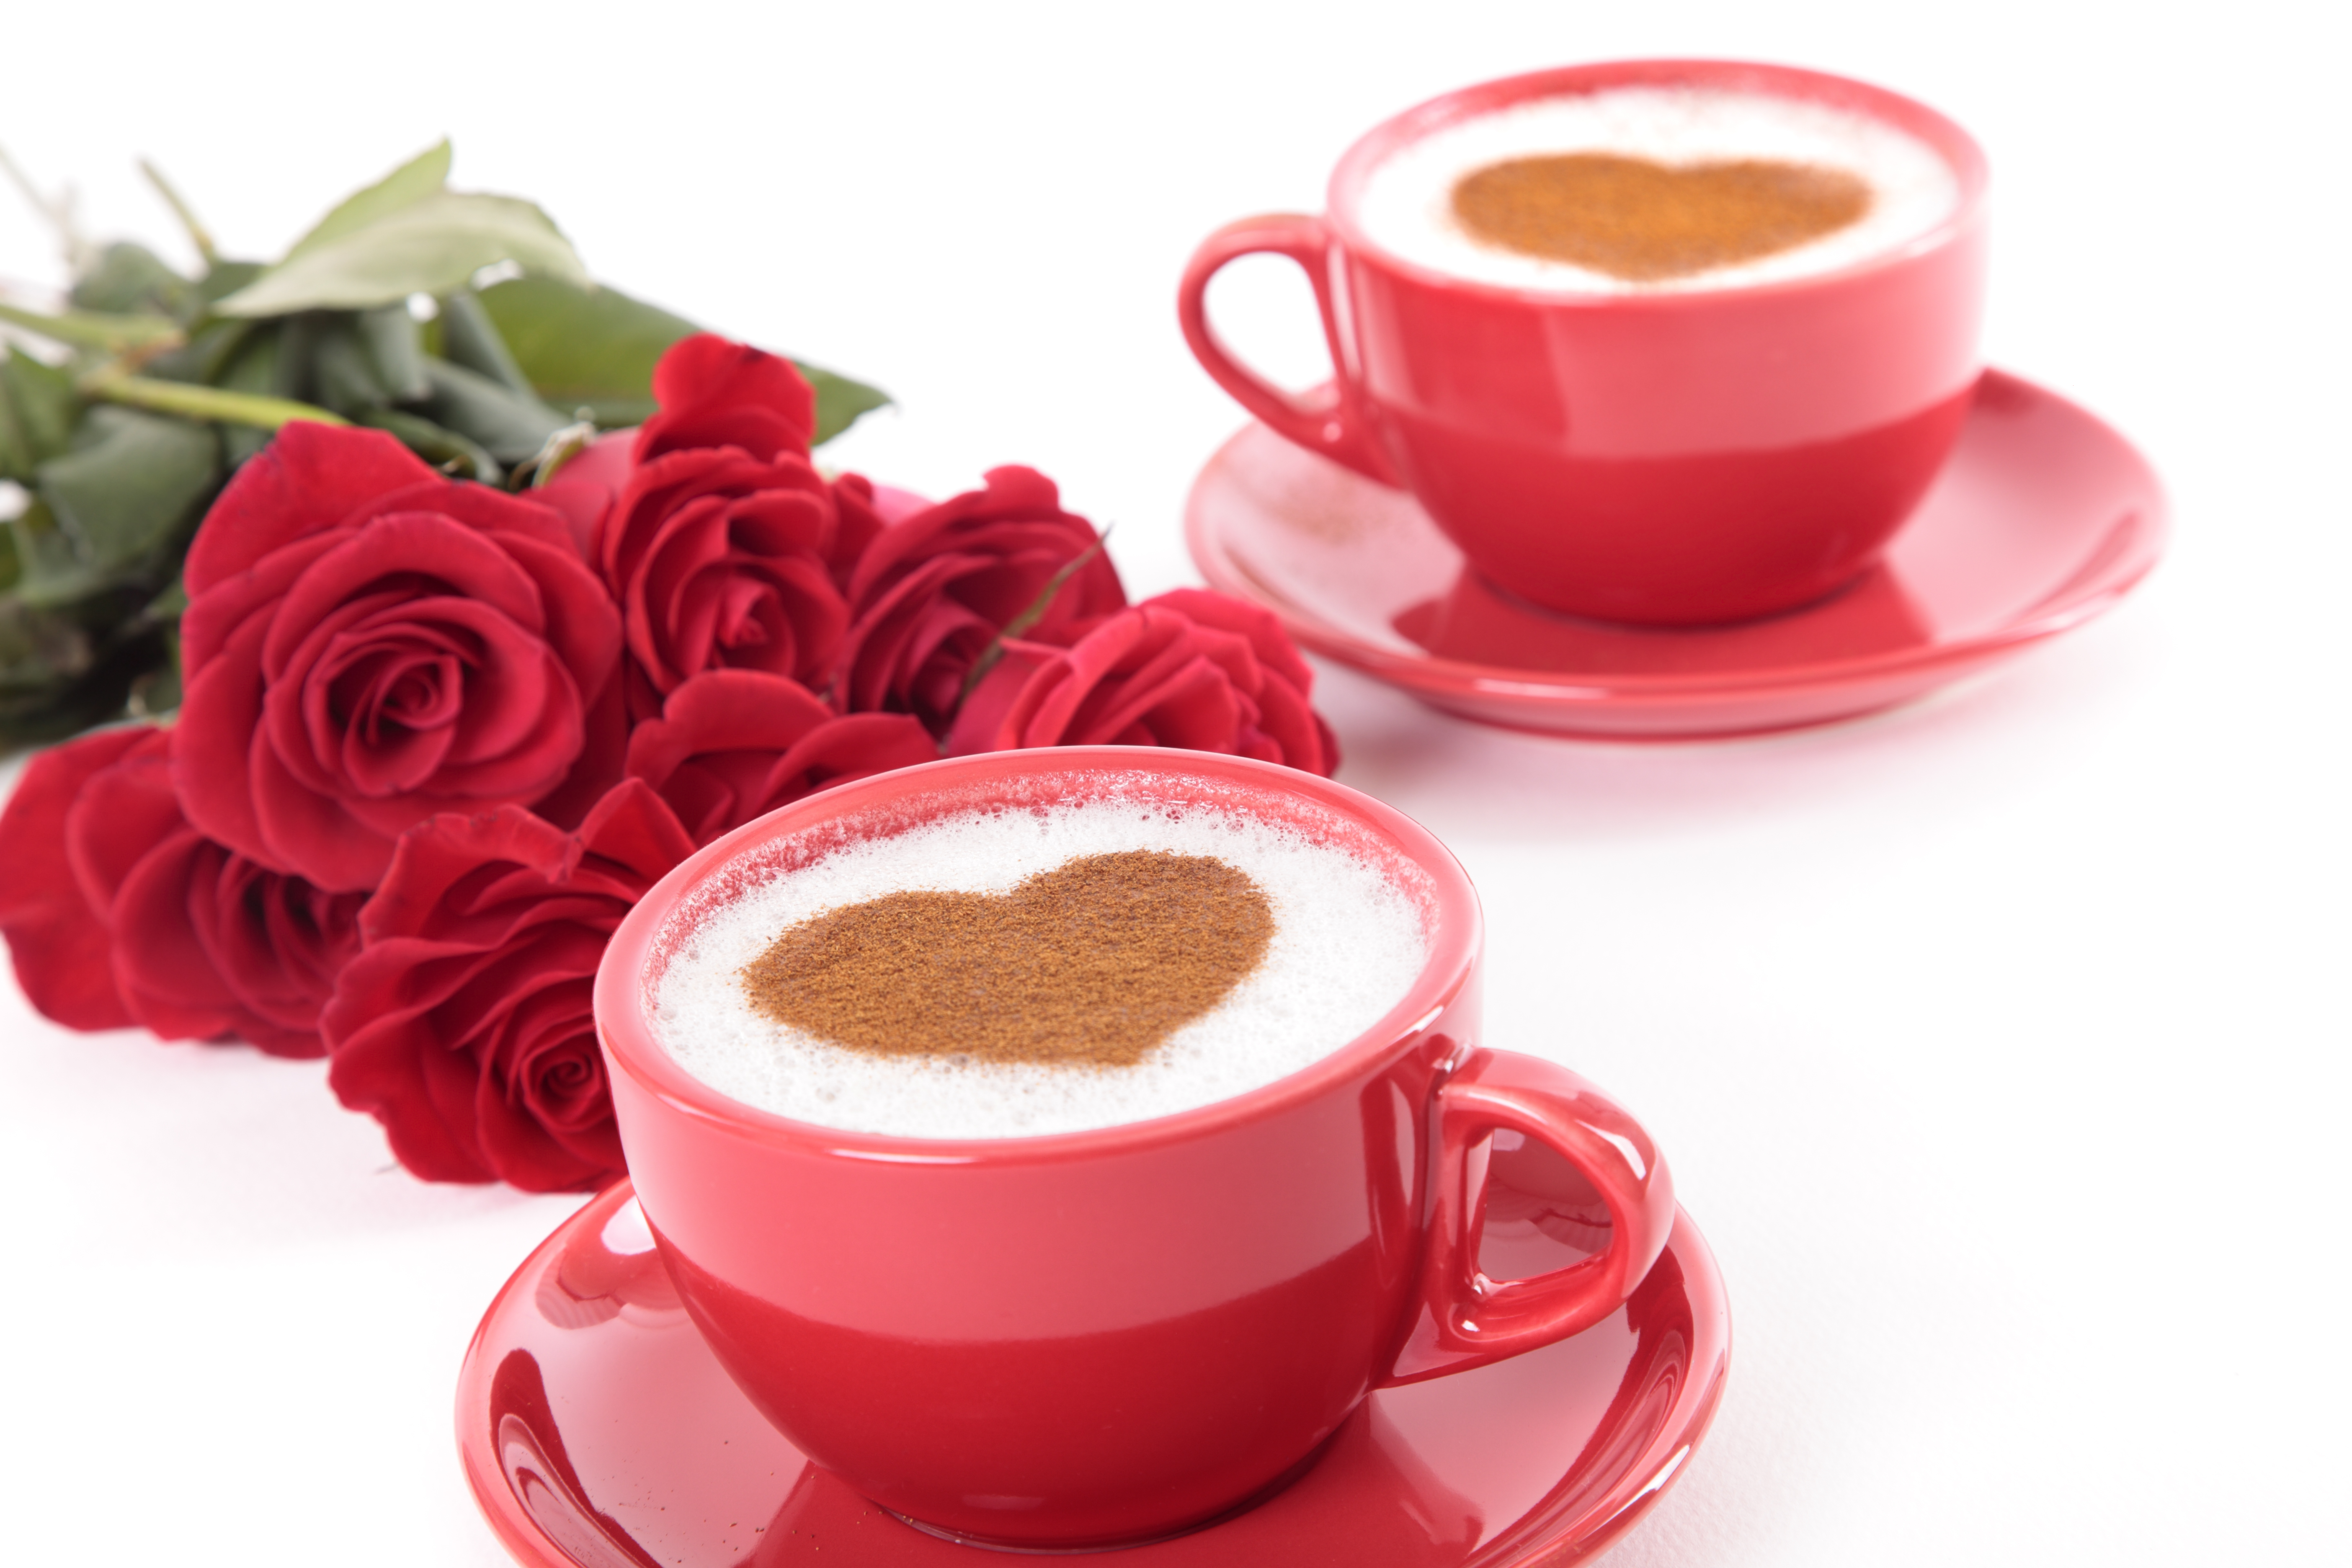 Coffee Cup Heart Shaped Red Flower Rose Still Life 5616x3744